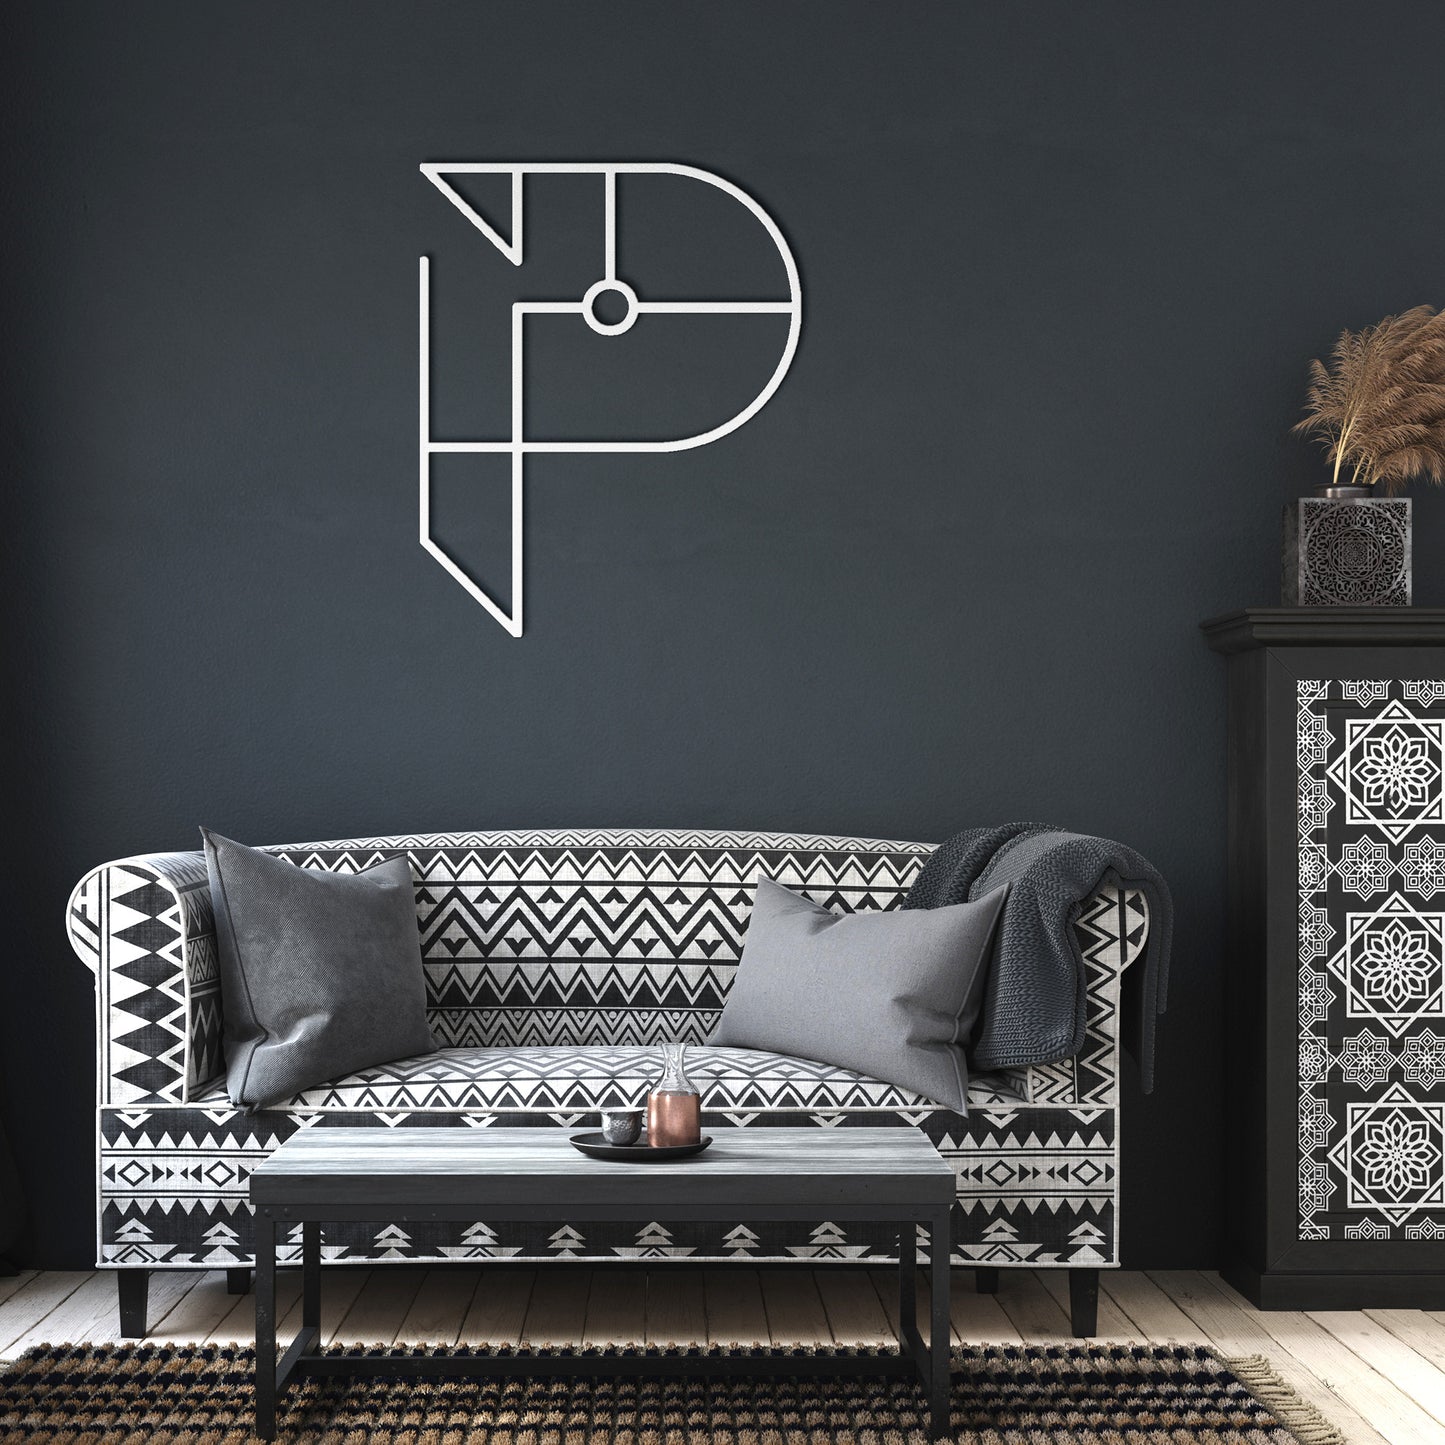 Letter P, Your Initial, Art Deco Letters, Monogram, Metal Signs, Rustic Sign, Wall Art, Wall Decor